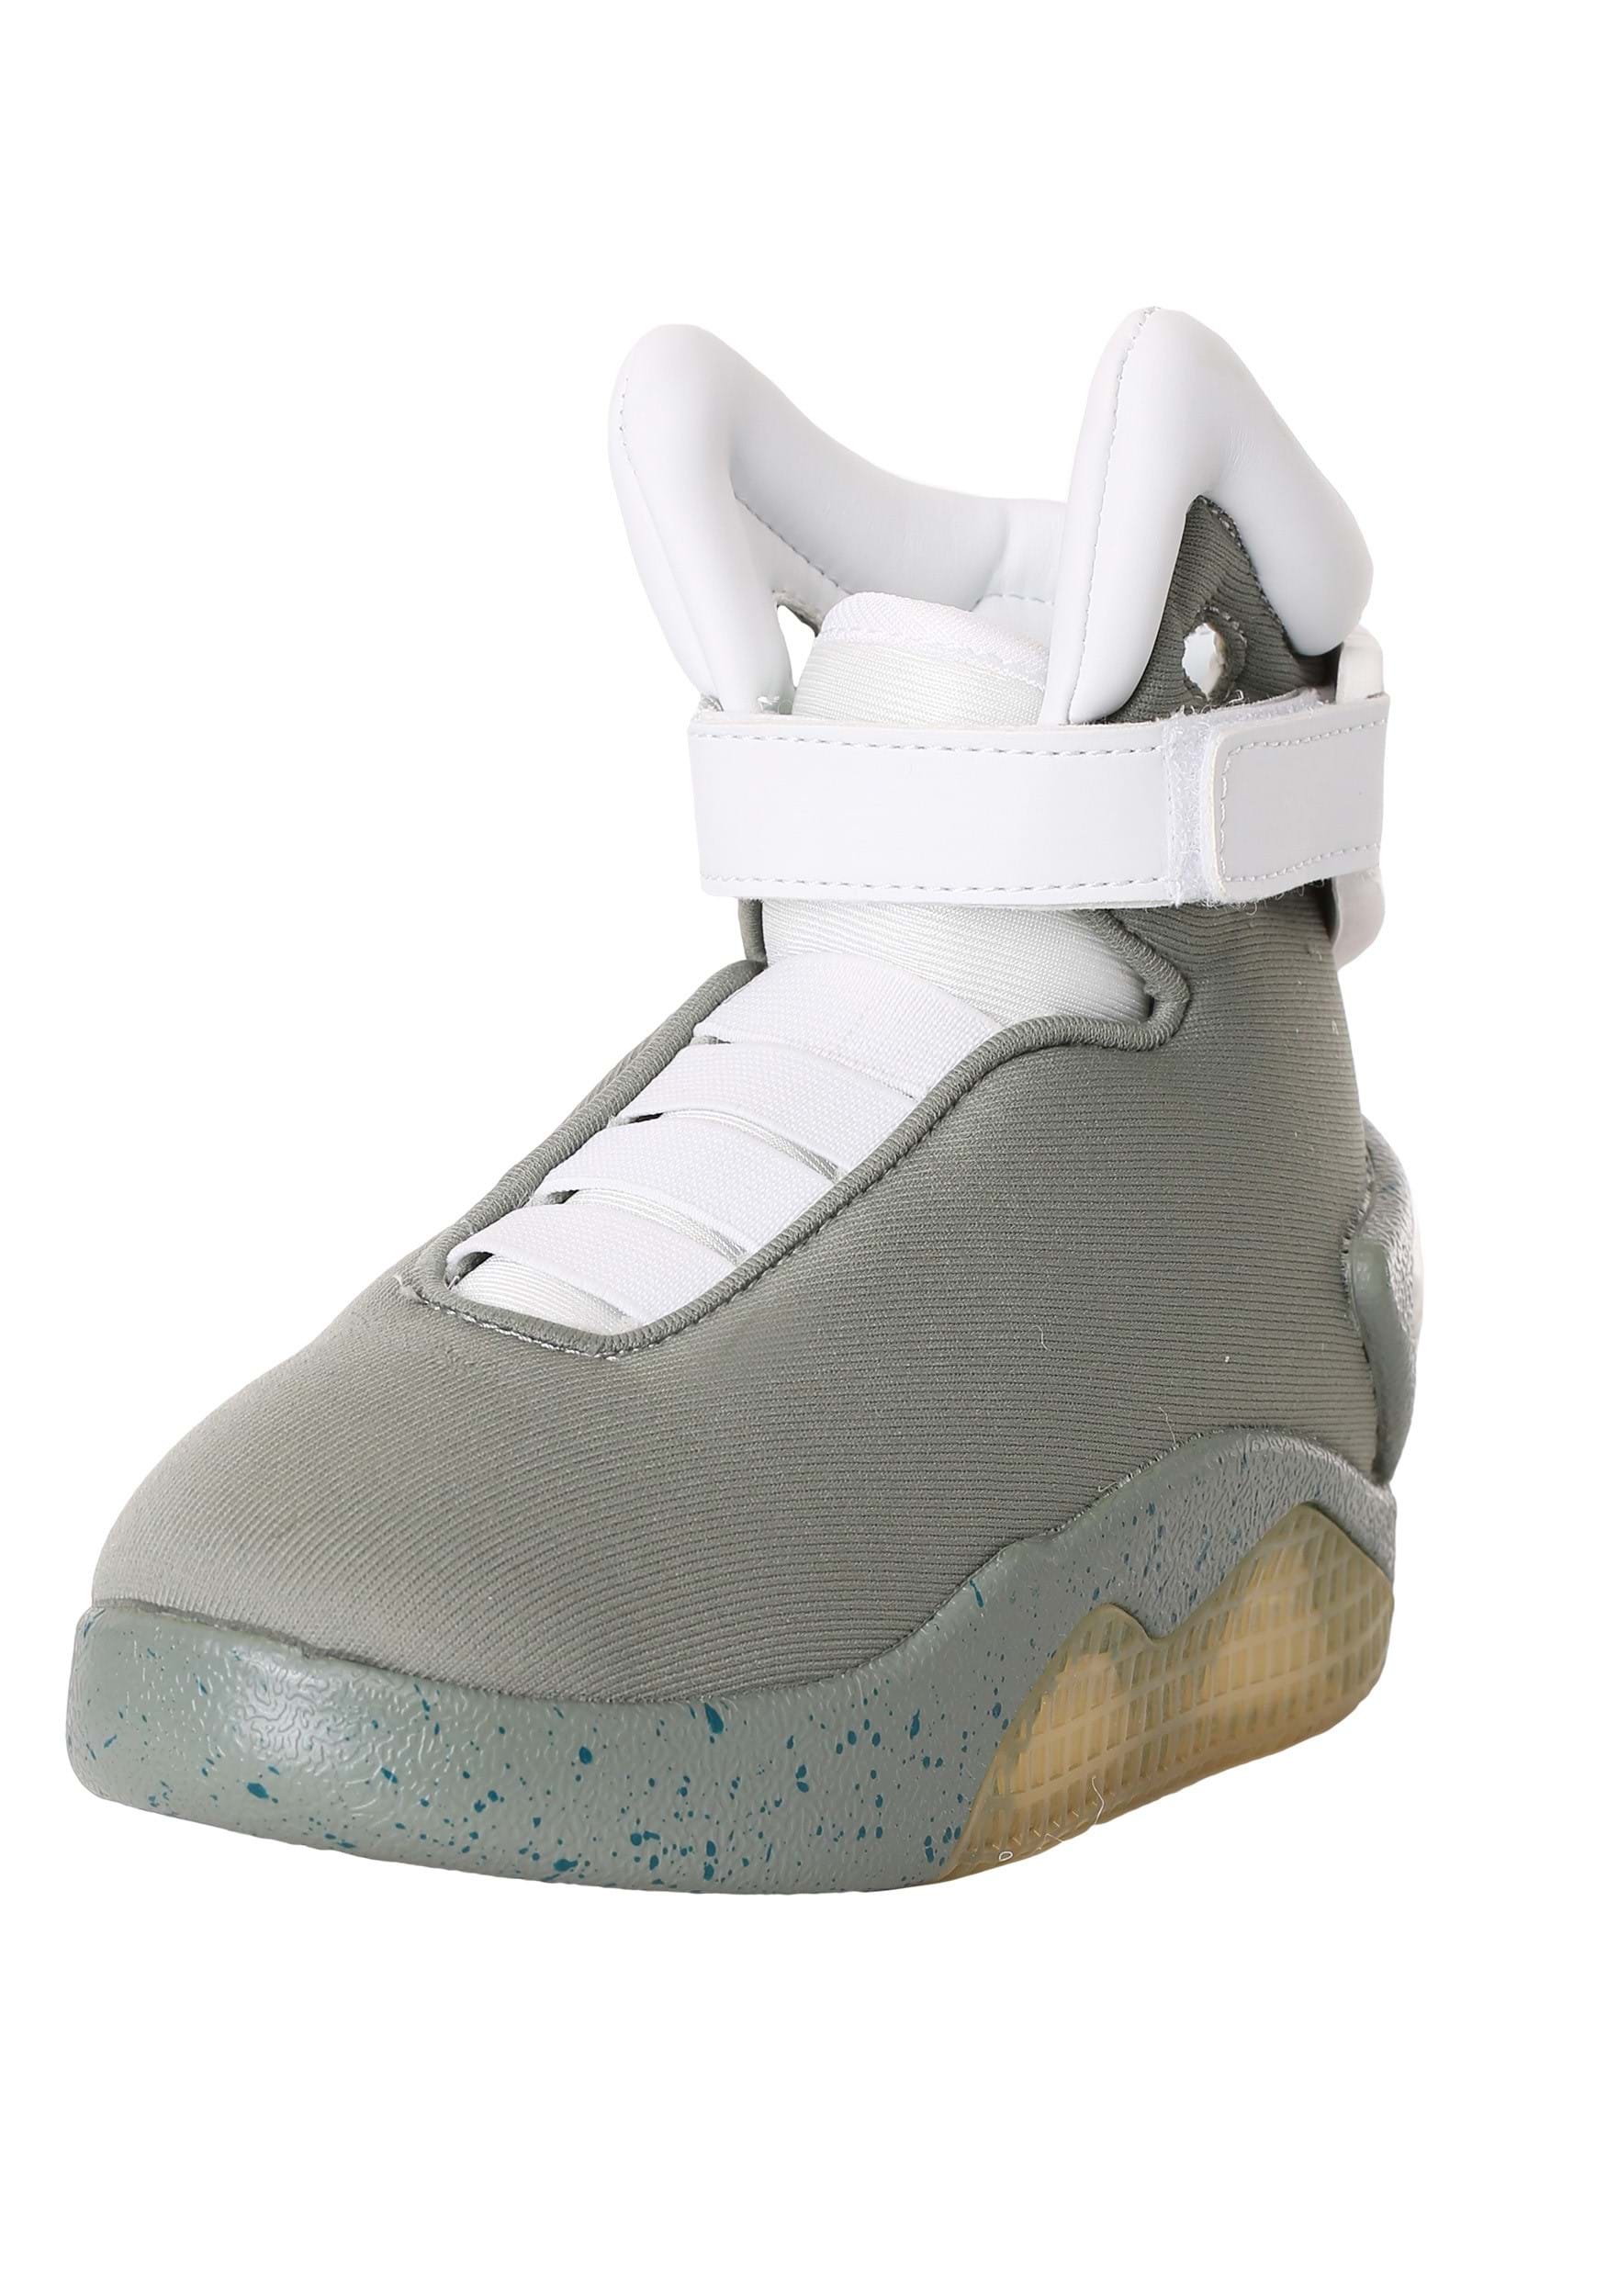 Image of Light Up Back to the Future Kid's Shoes ID BTF2247CH-11